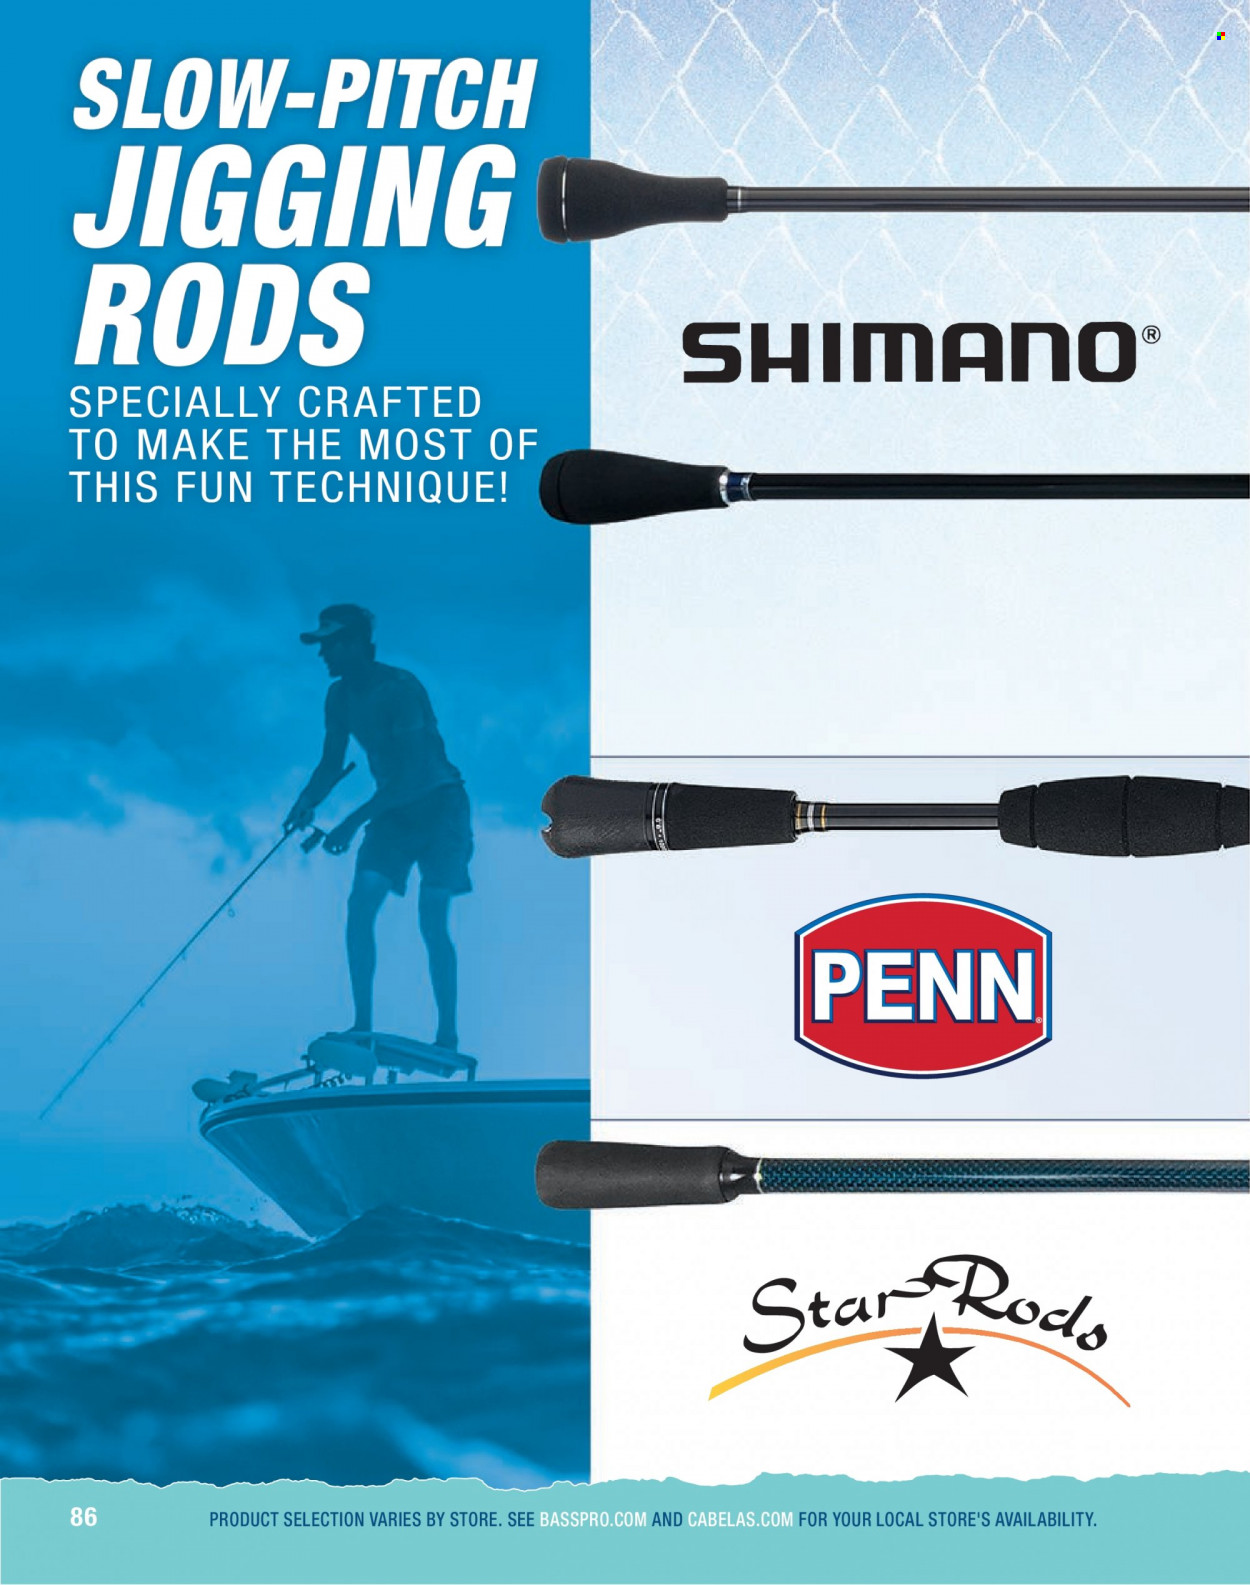 Bass Pro Shops Flyer - Sales products - Shimano, fishing rod, Penn. Page 86.